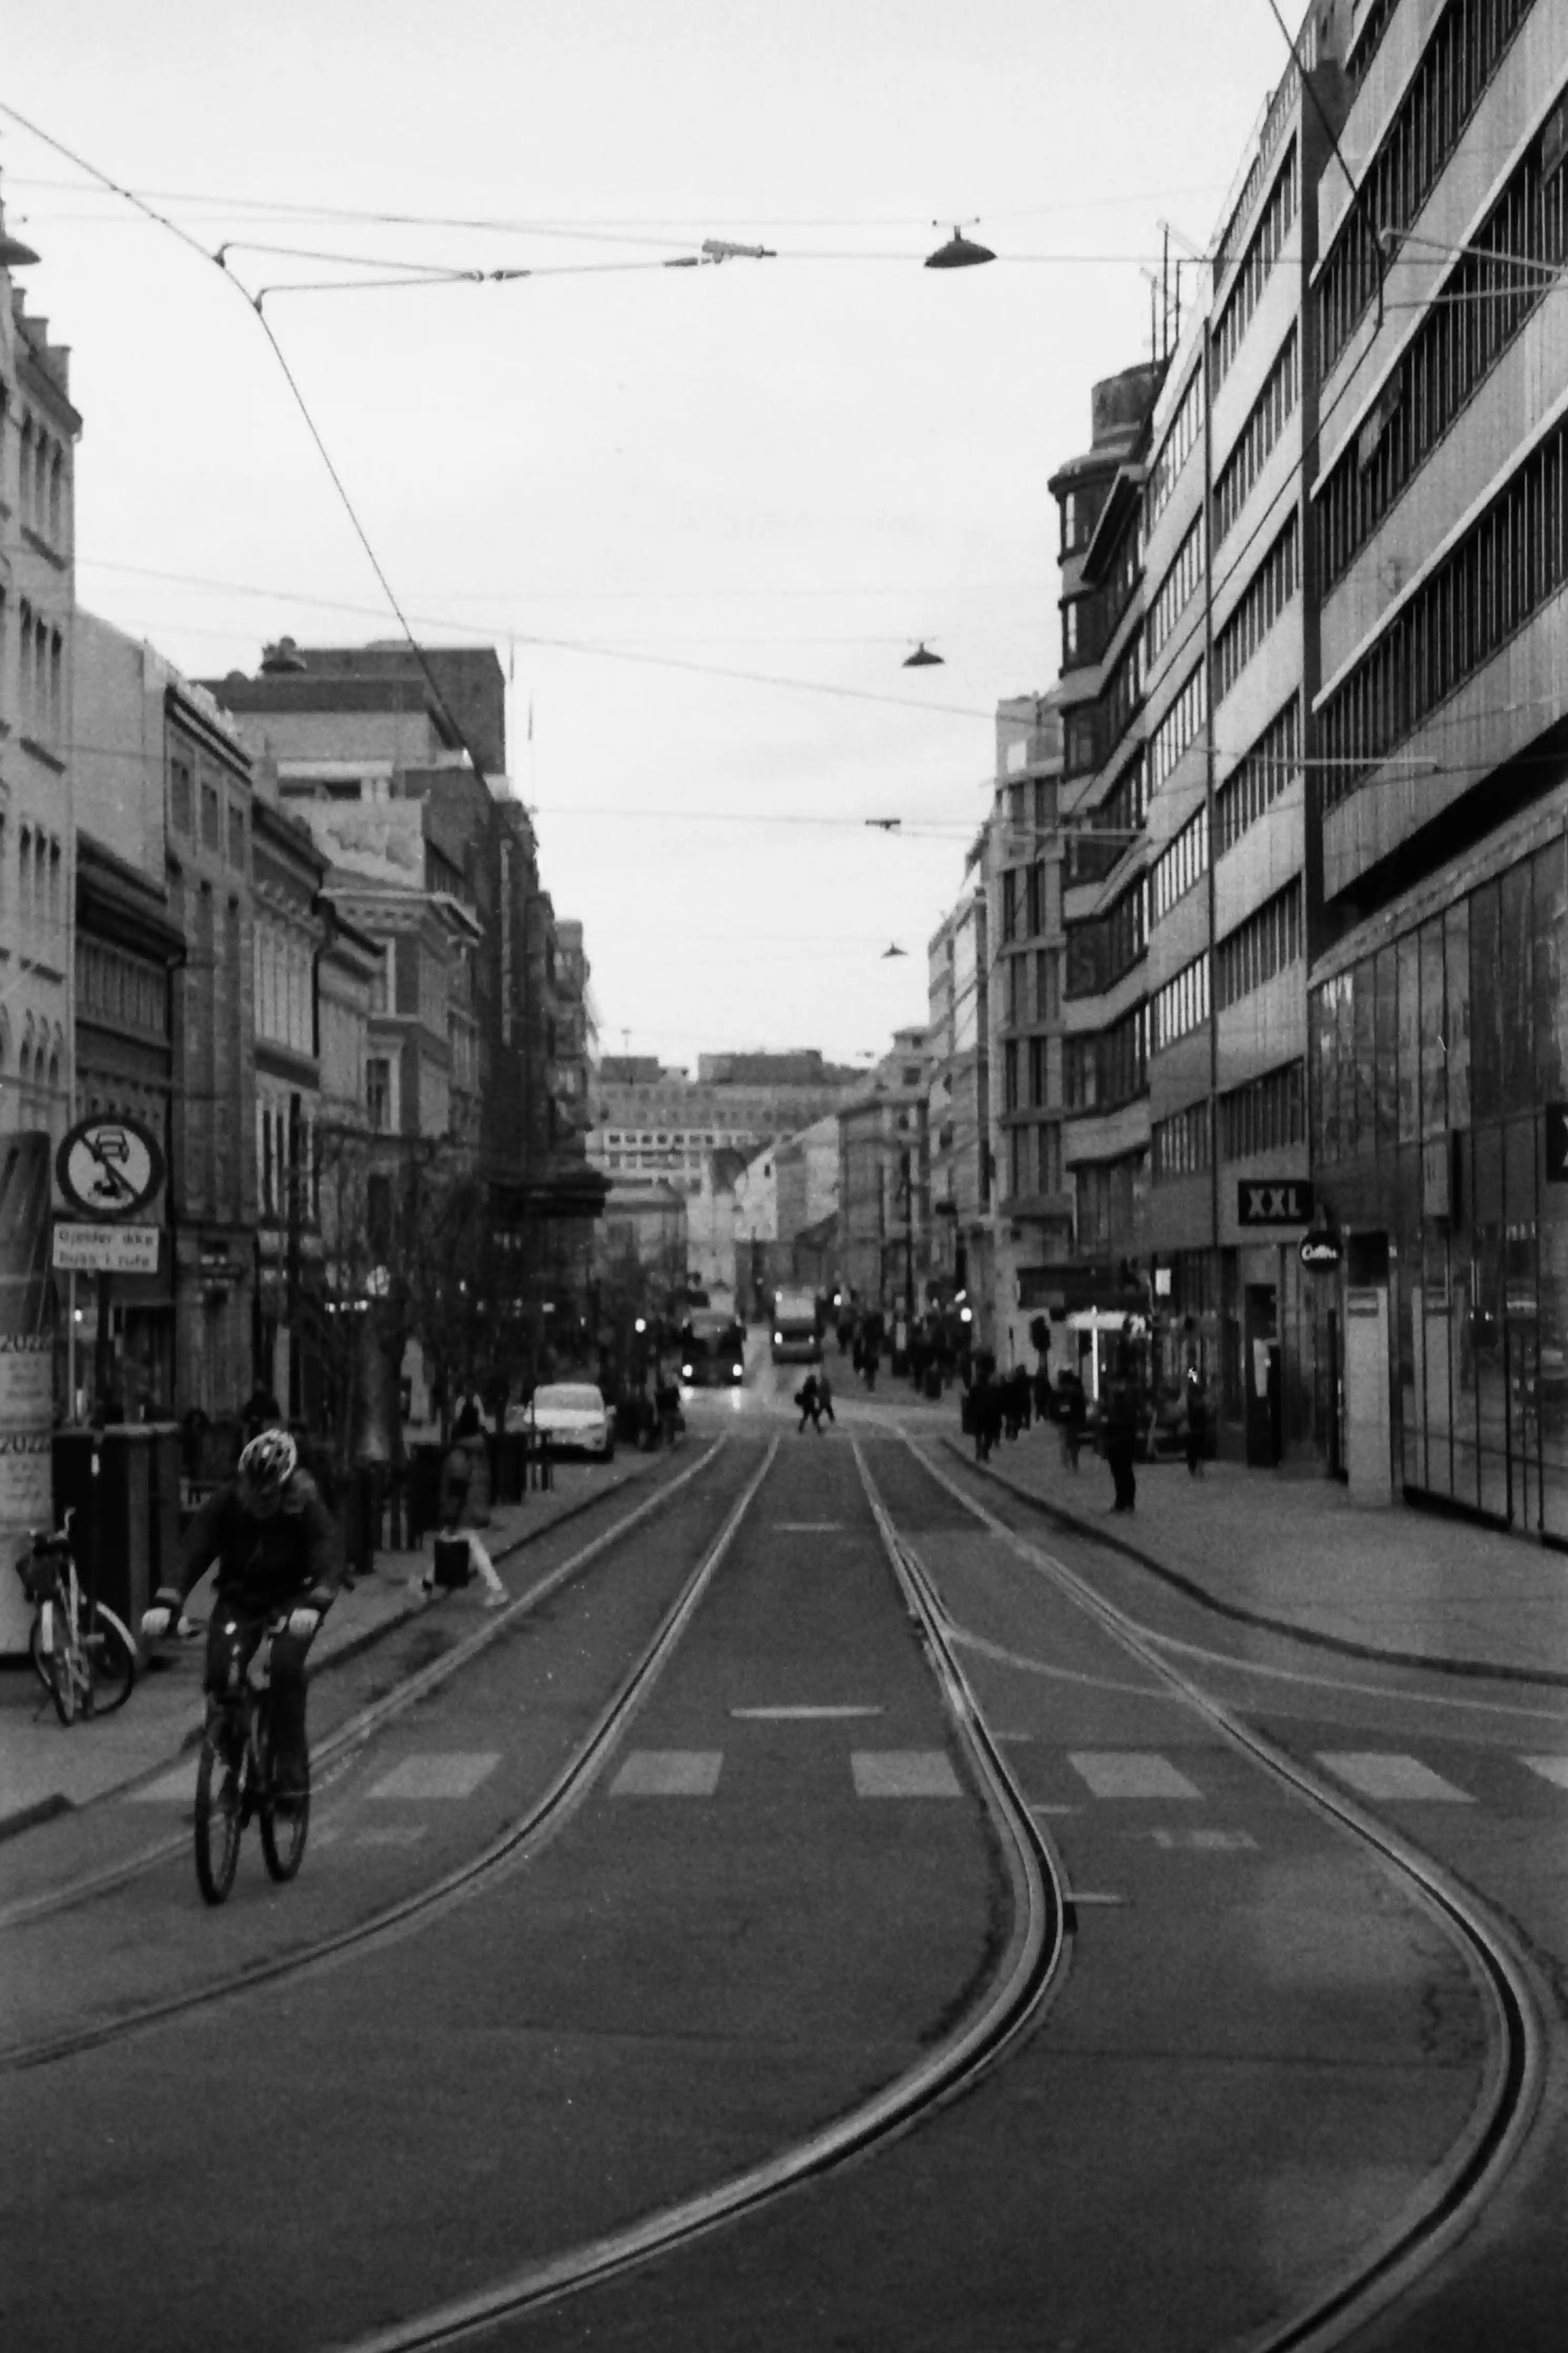 Black and white picture in portrait mode of a street featuring people on bicycles, tram tracks and some people. There are wires hanging from some poles and buildings